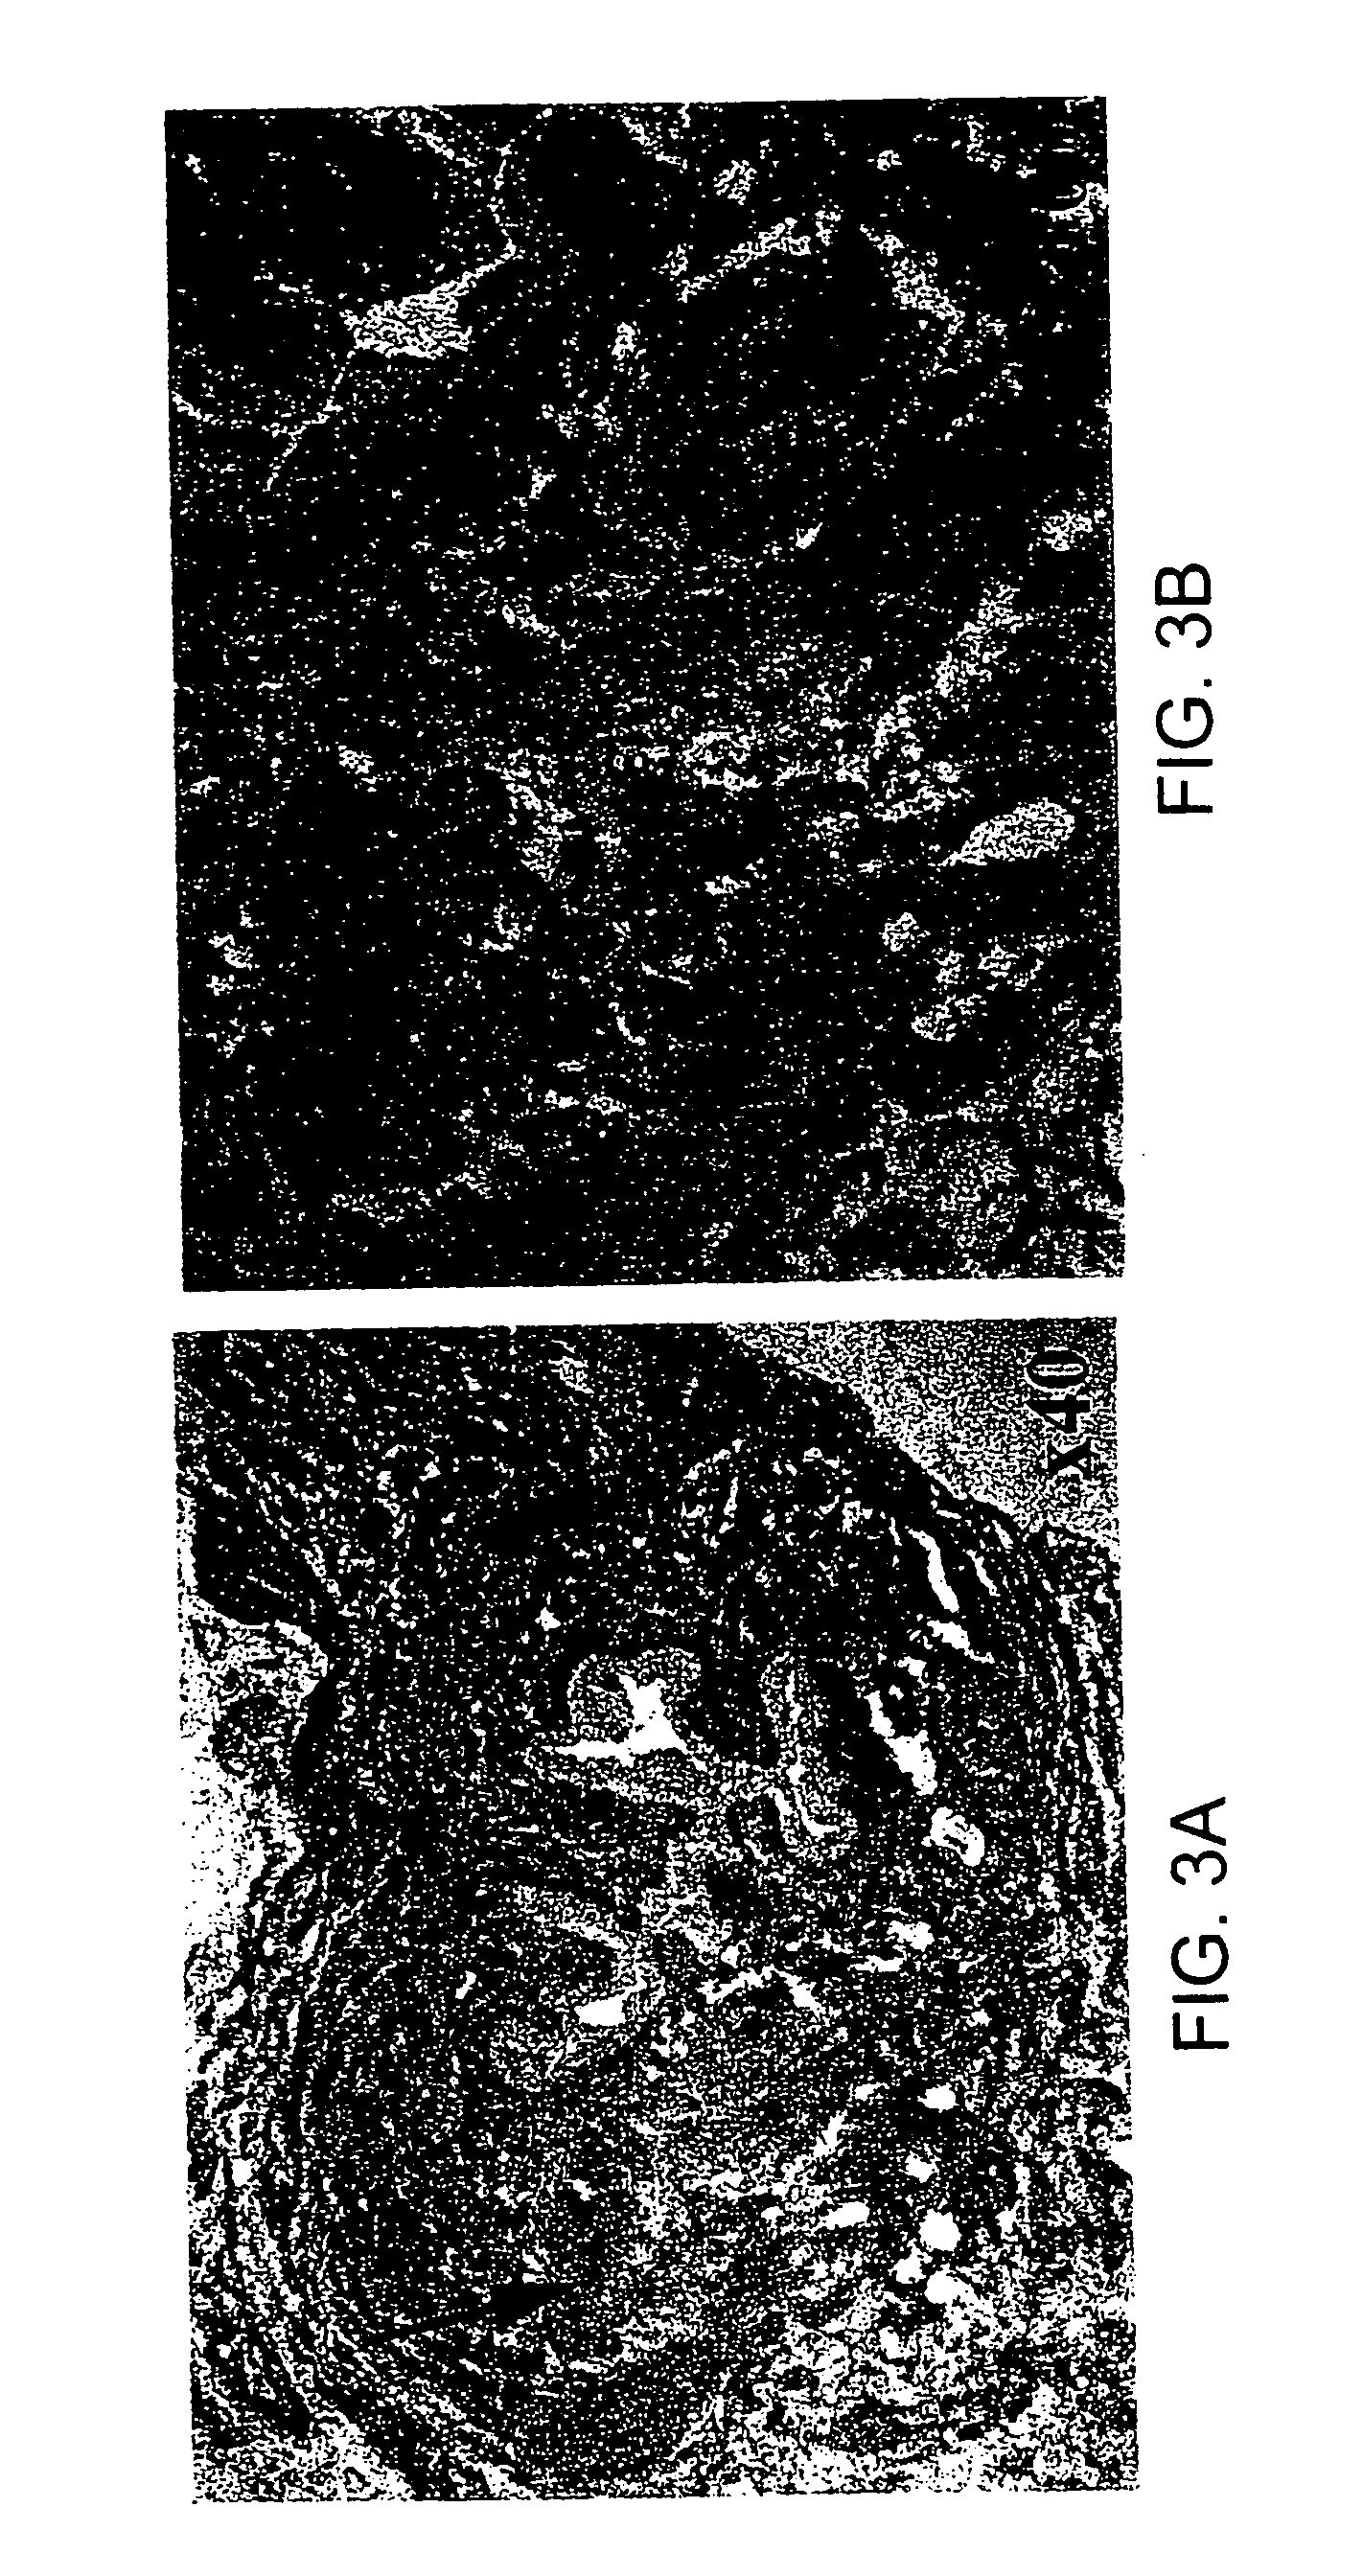 Soft tissue and bone augmentation and bulking utilizing muscle-derived progenitor cells, compositions and treatments thereof